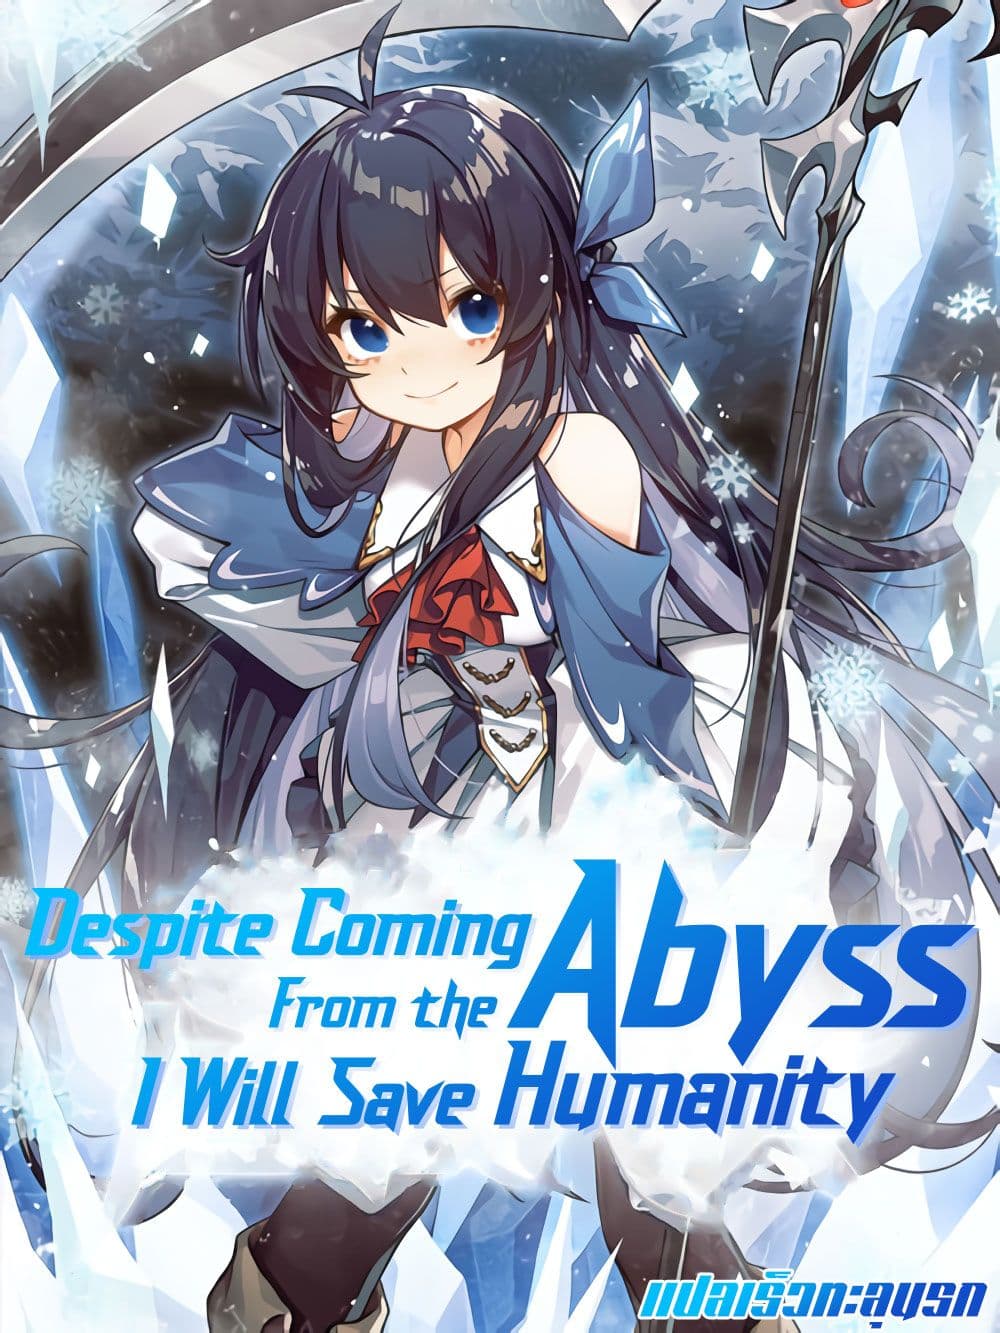 Despite Coming From the Abyss, I Will Save Humanity 22-22